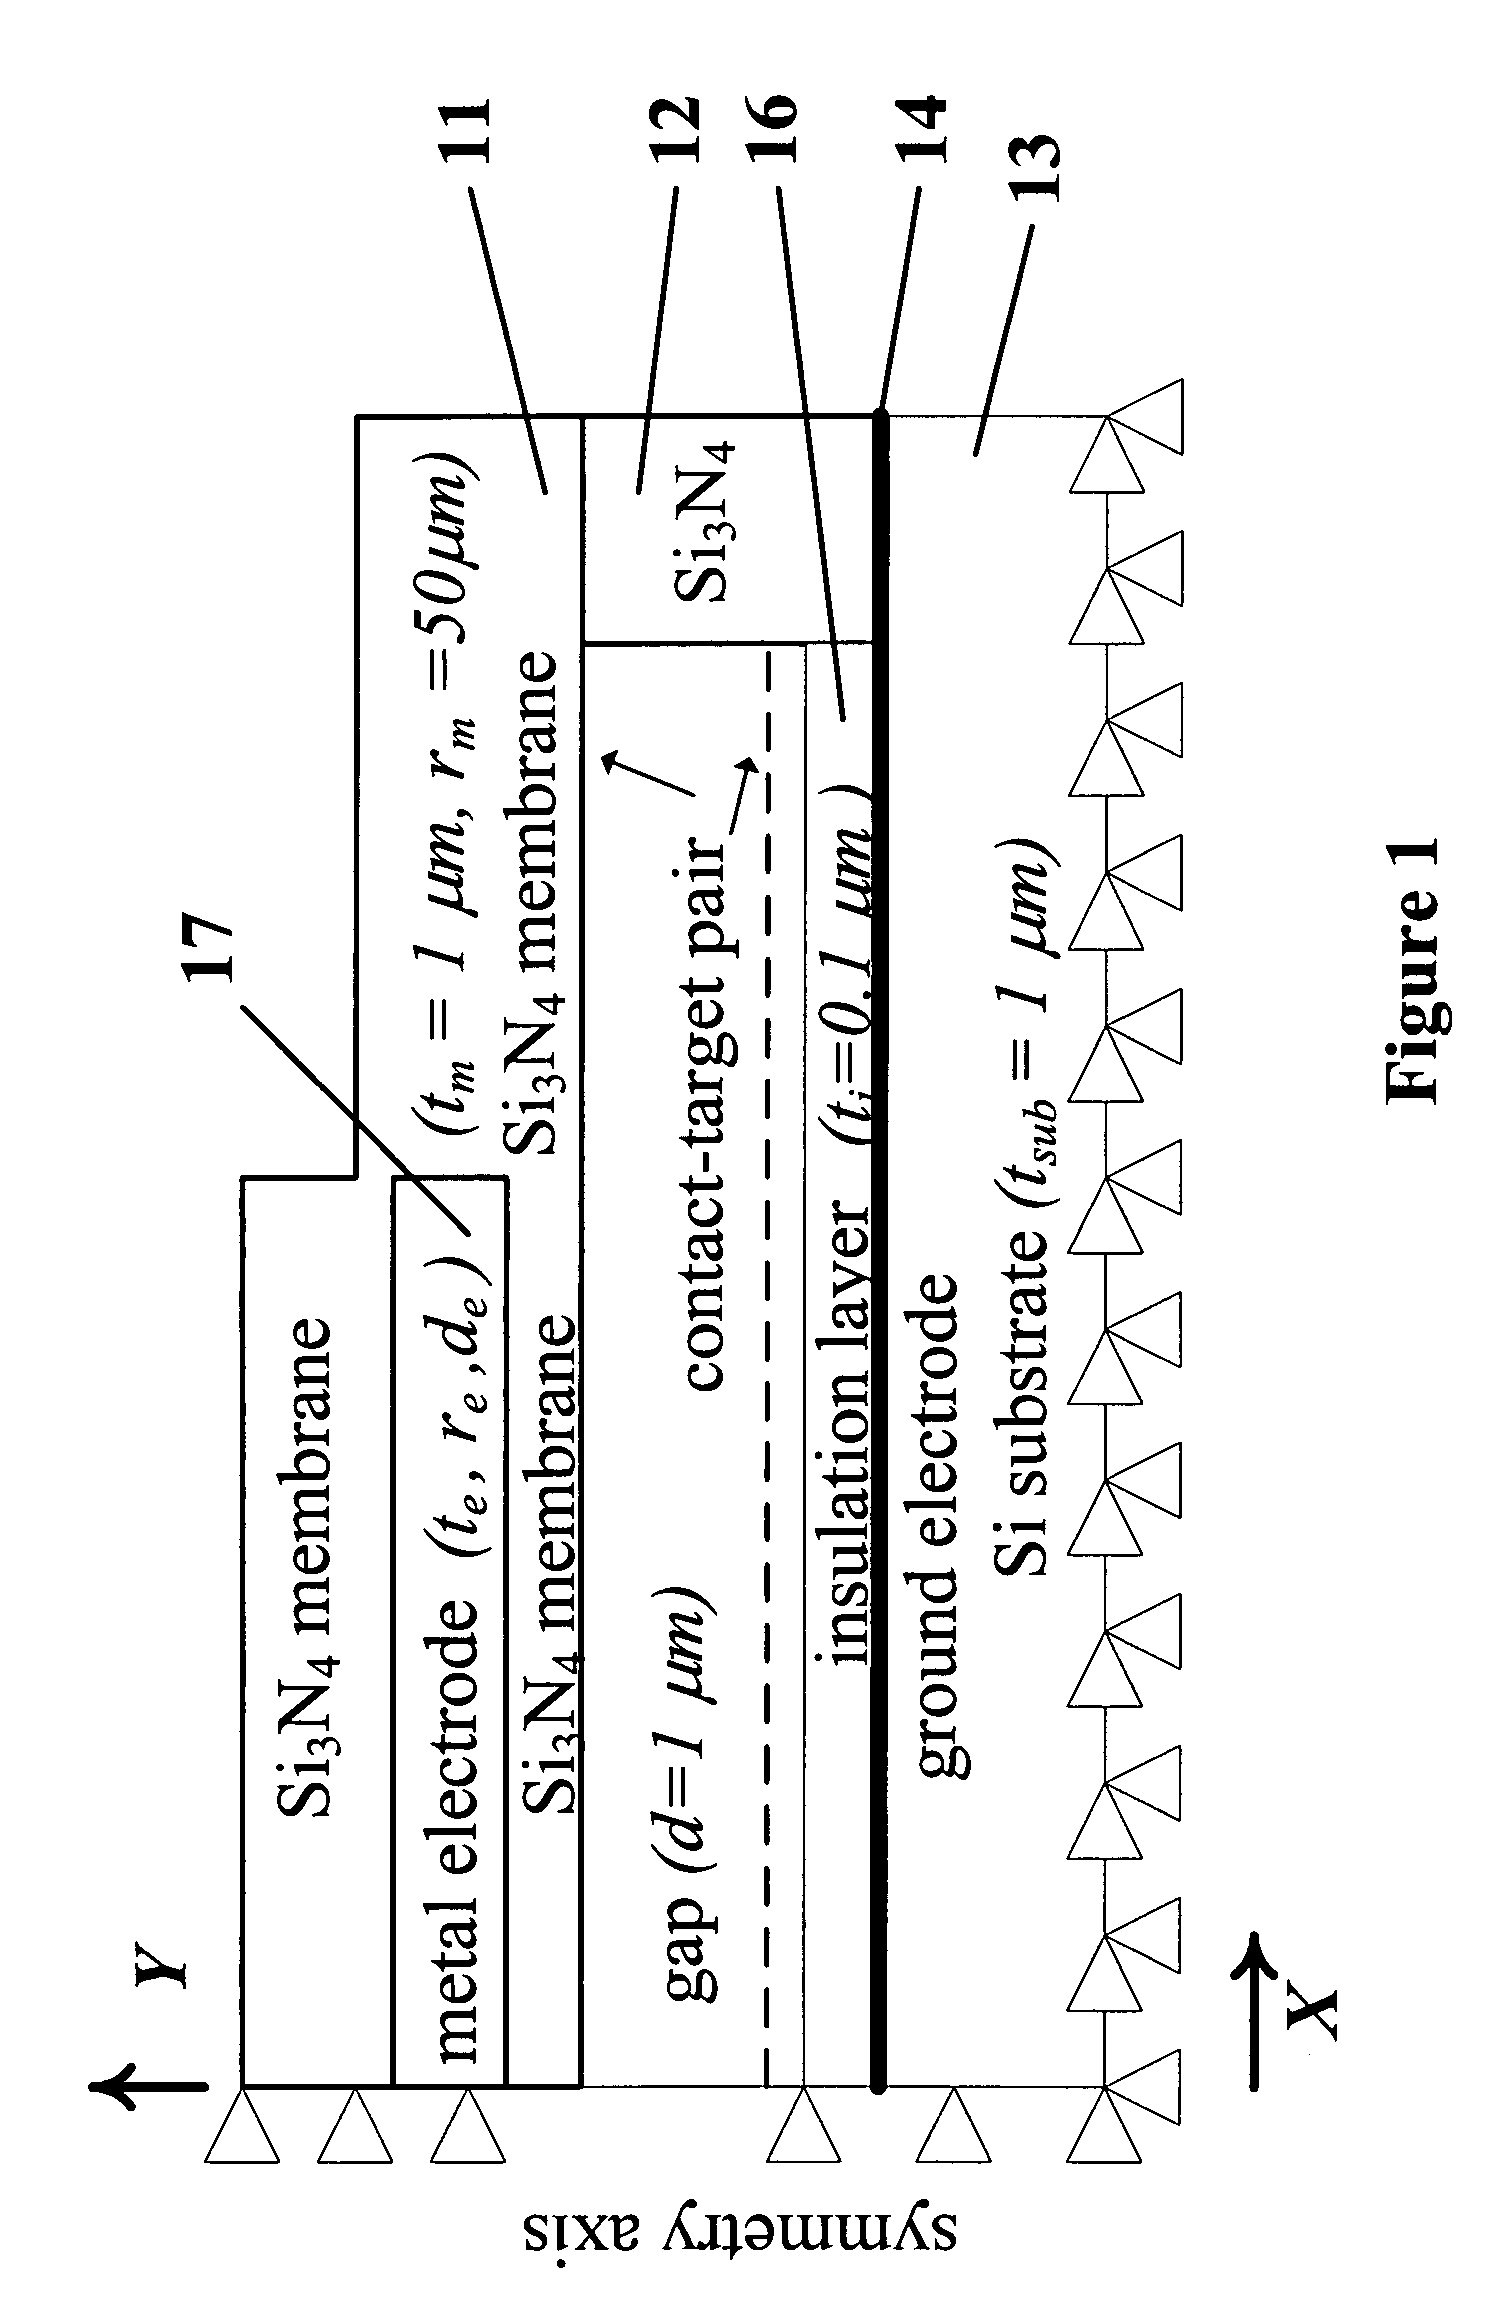 Method and system for operating capacitive membrane ultrasonic transducers